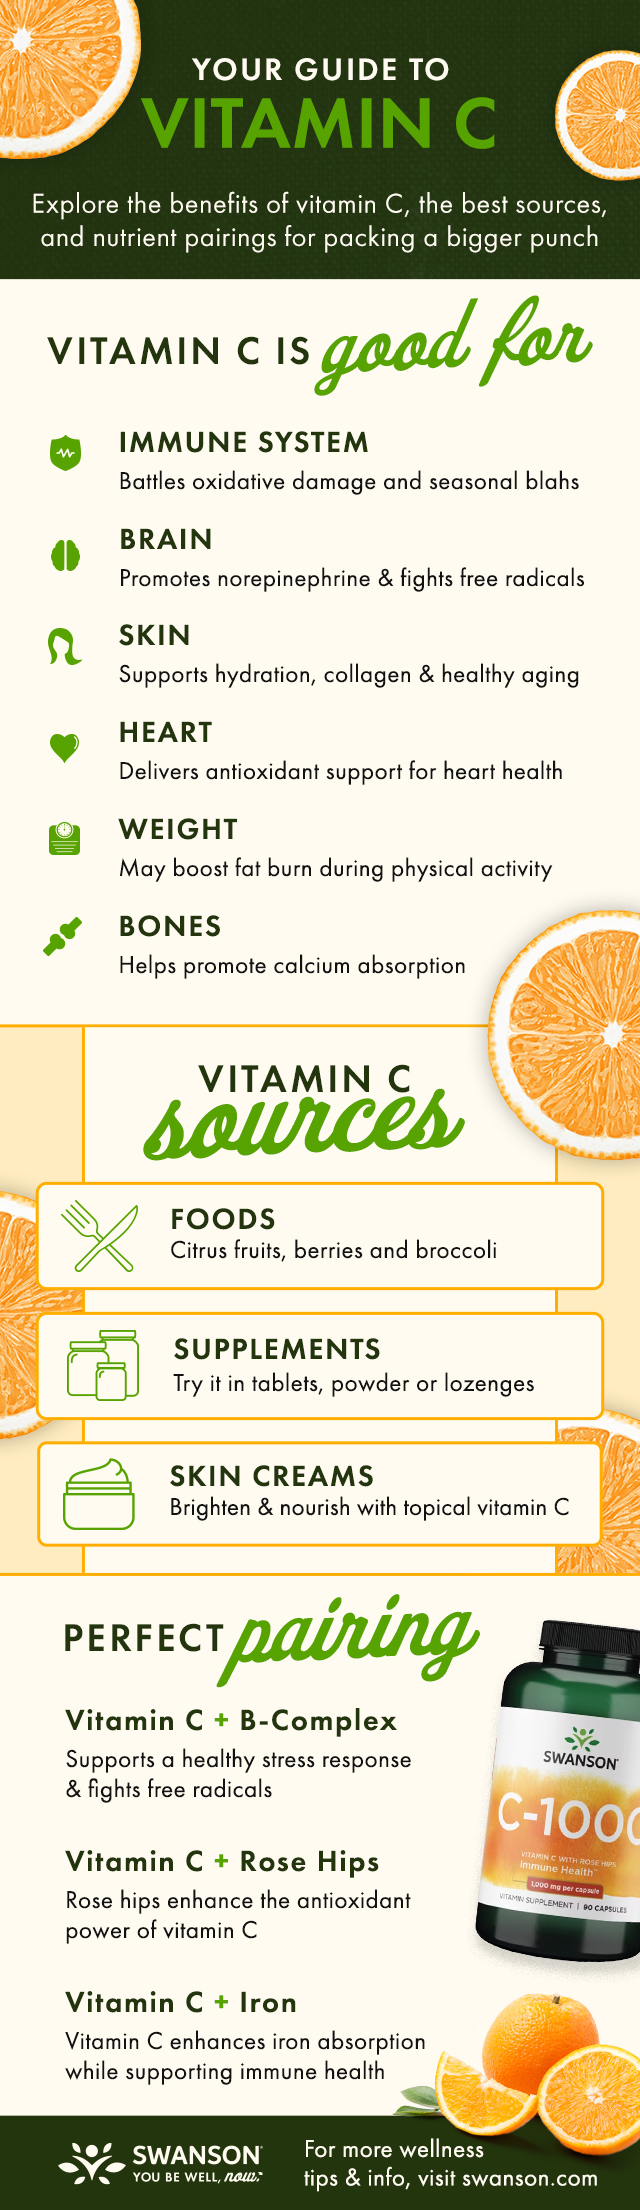 Guide to Vitamin C by Swanson Health